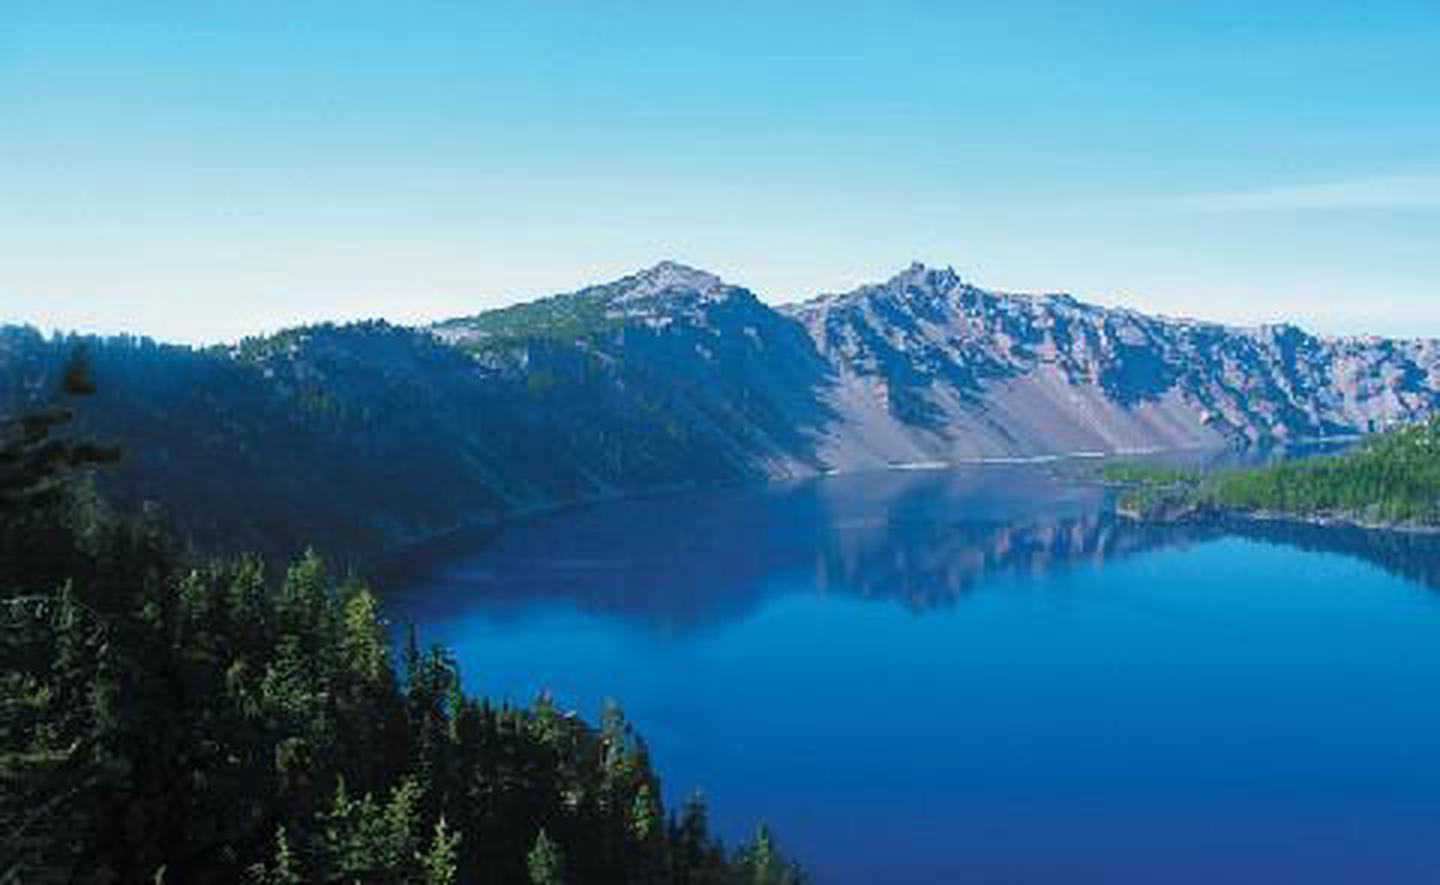 Abundant Activities Crater Lake National Park offers many year-round things to do. Enjoy adventurous activities such as winter cross-country skiing and snowshoeing, summer camping, boat tours, hiking, and scenic tours around the lake.